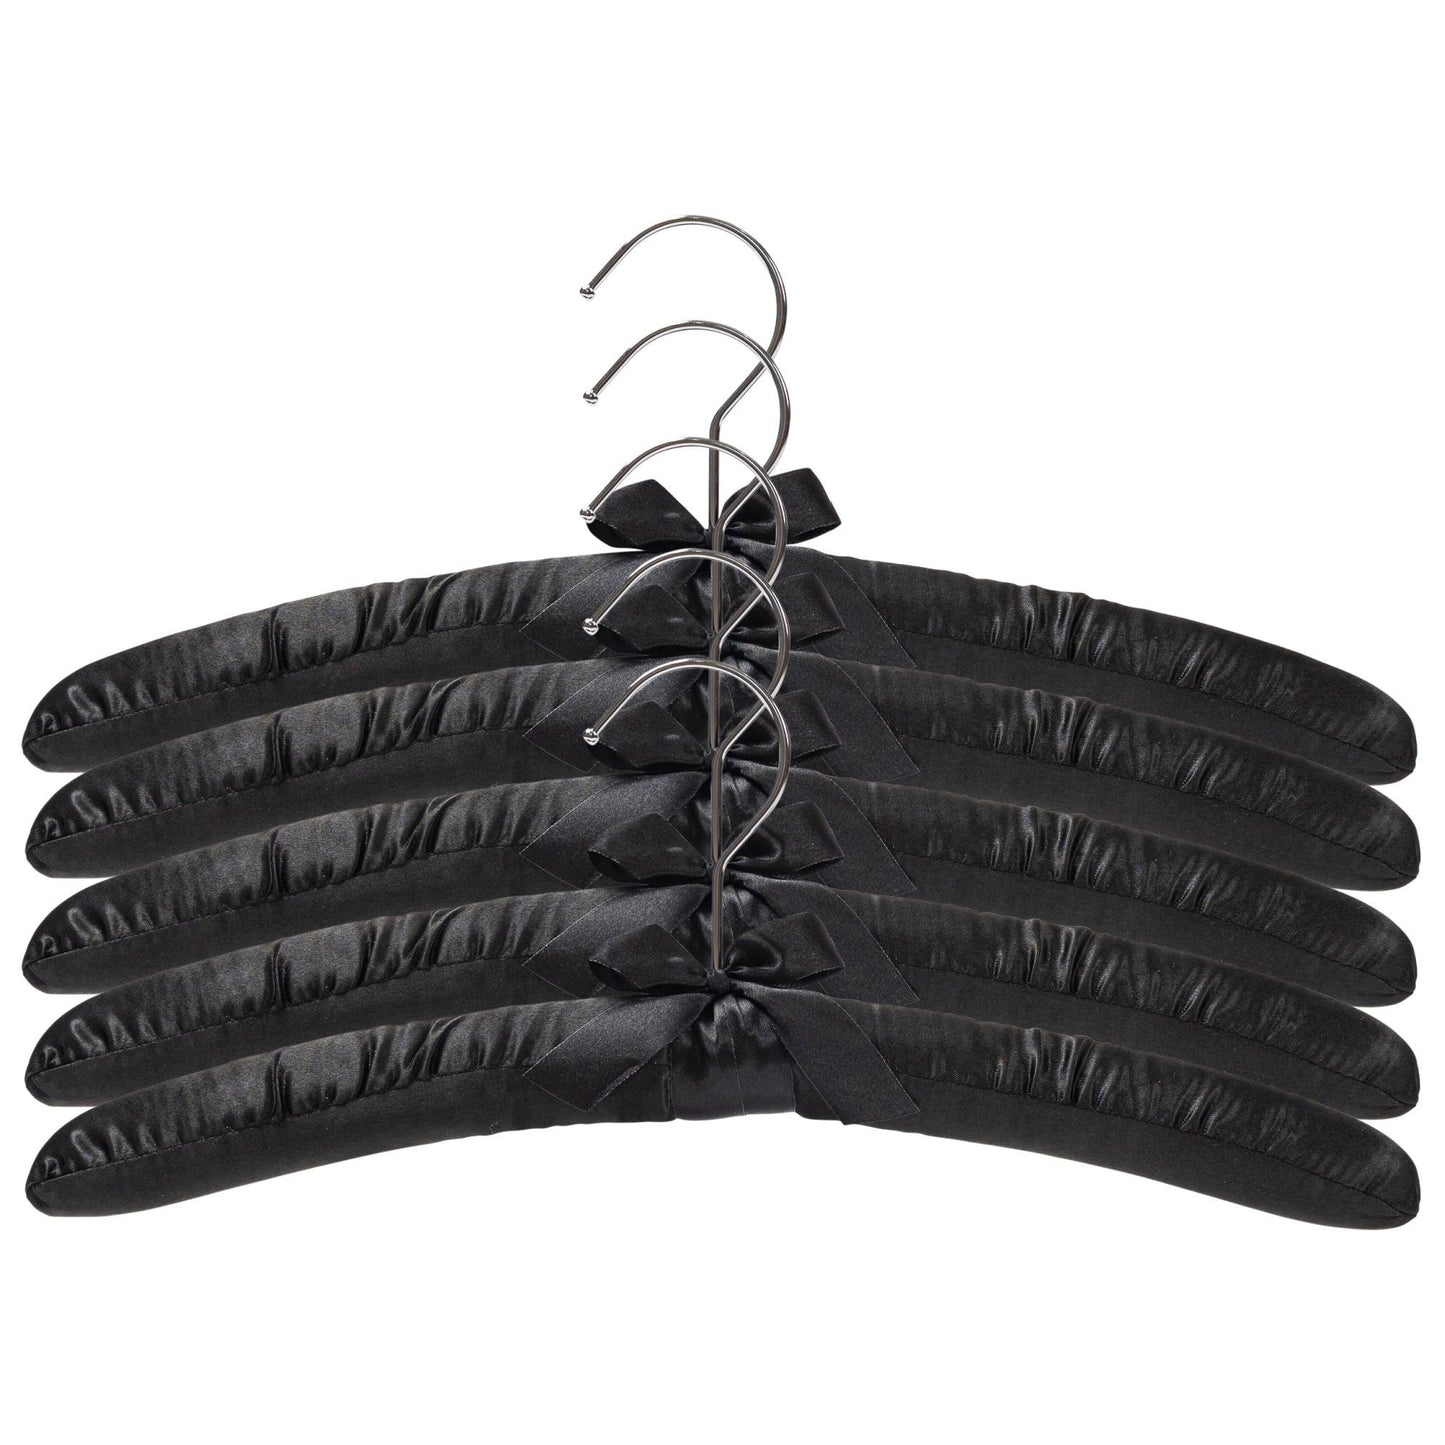 Padded coat hangers With Chrome Hook - Black Satin - 38cm X 45mm Thick (Sold in Bundles of 20/50)